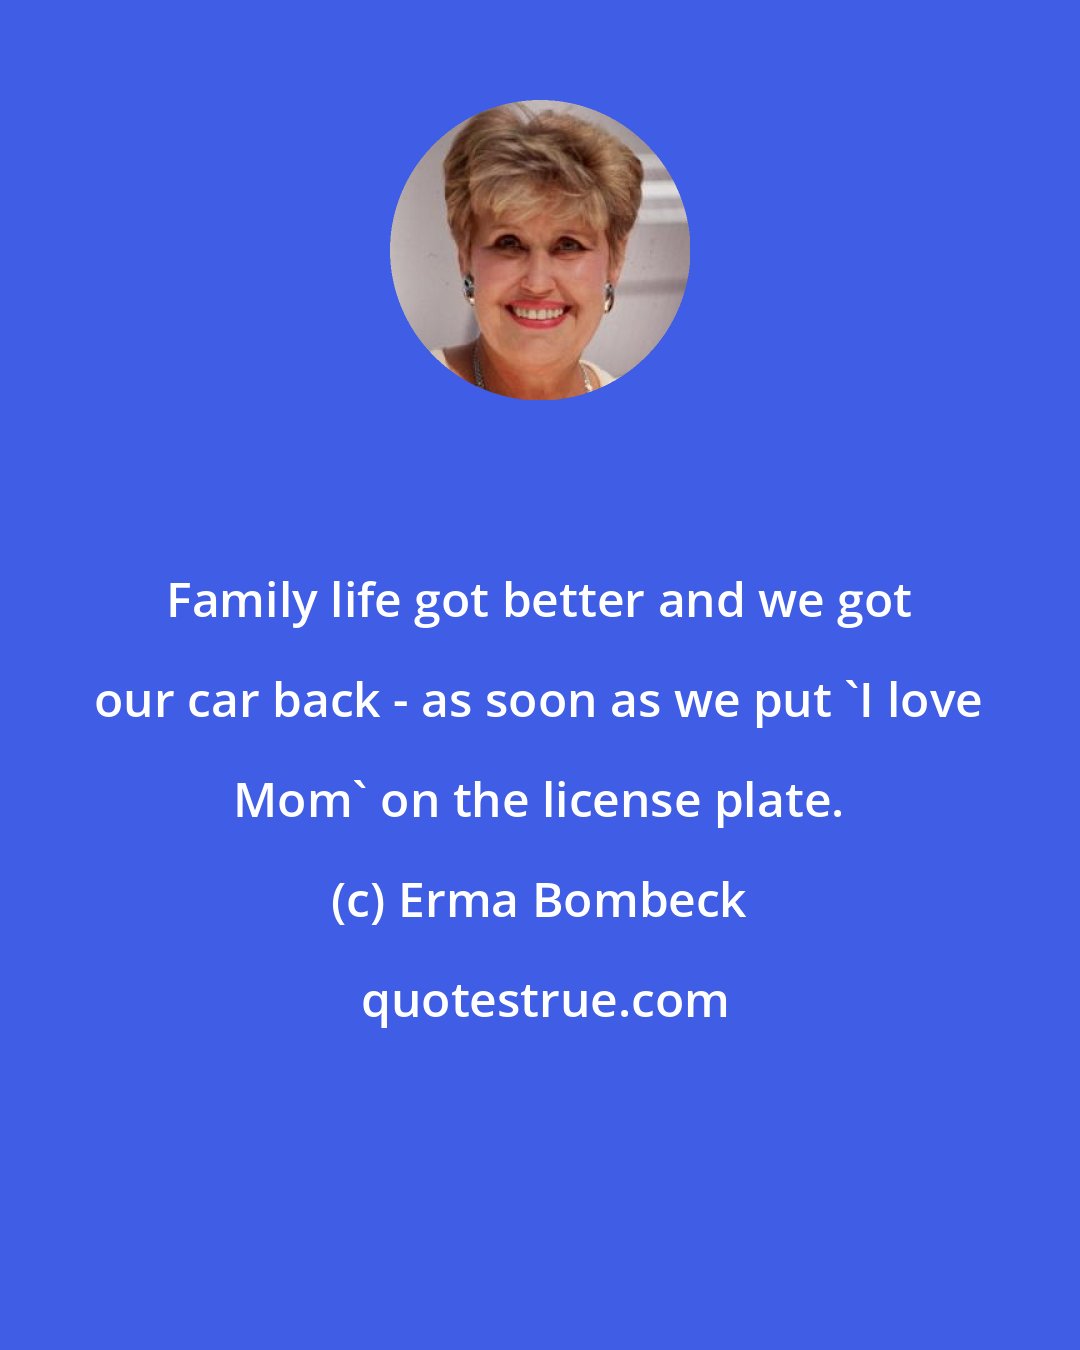 Erma Bombeck: Family life got better and we got our car back - as soon as we put 'I love Mom' on the license plate.